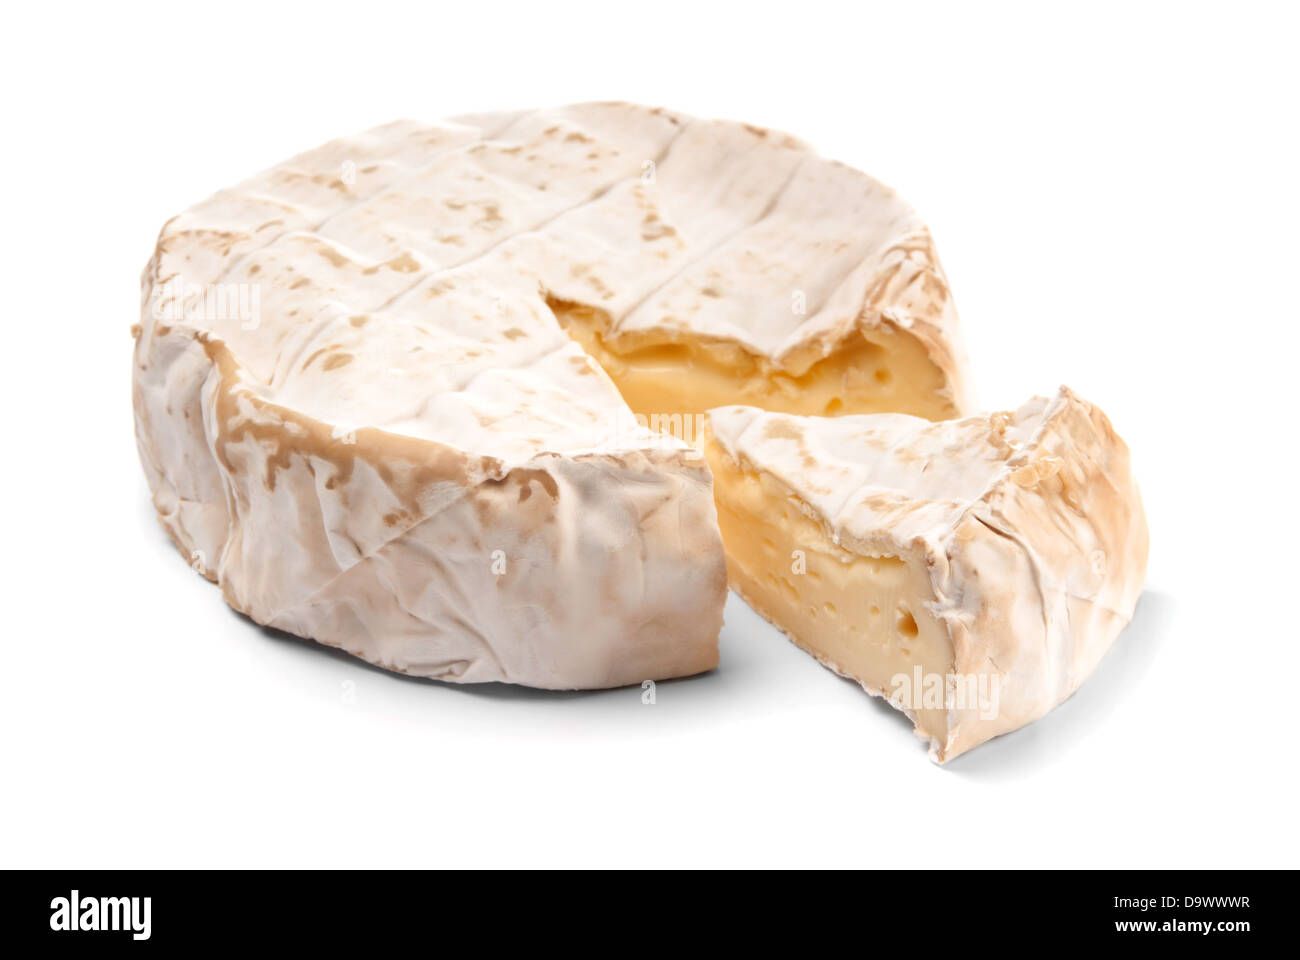 Round Brie cheese with a section cut out over white Stock Photo